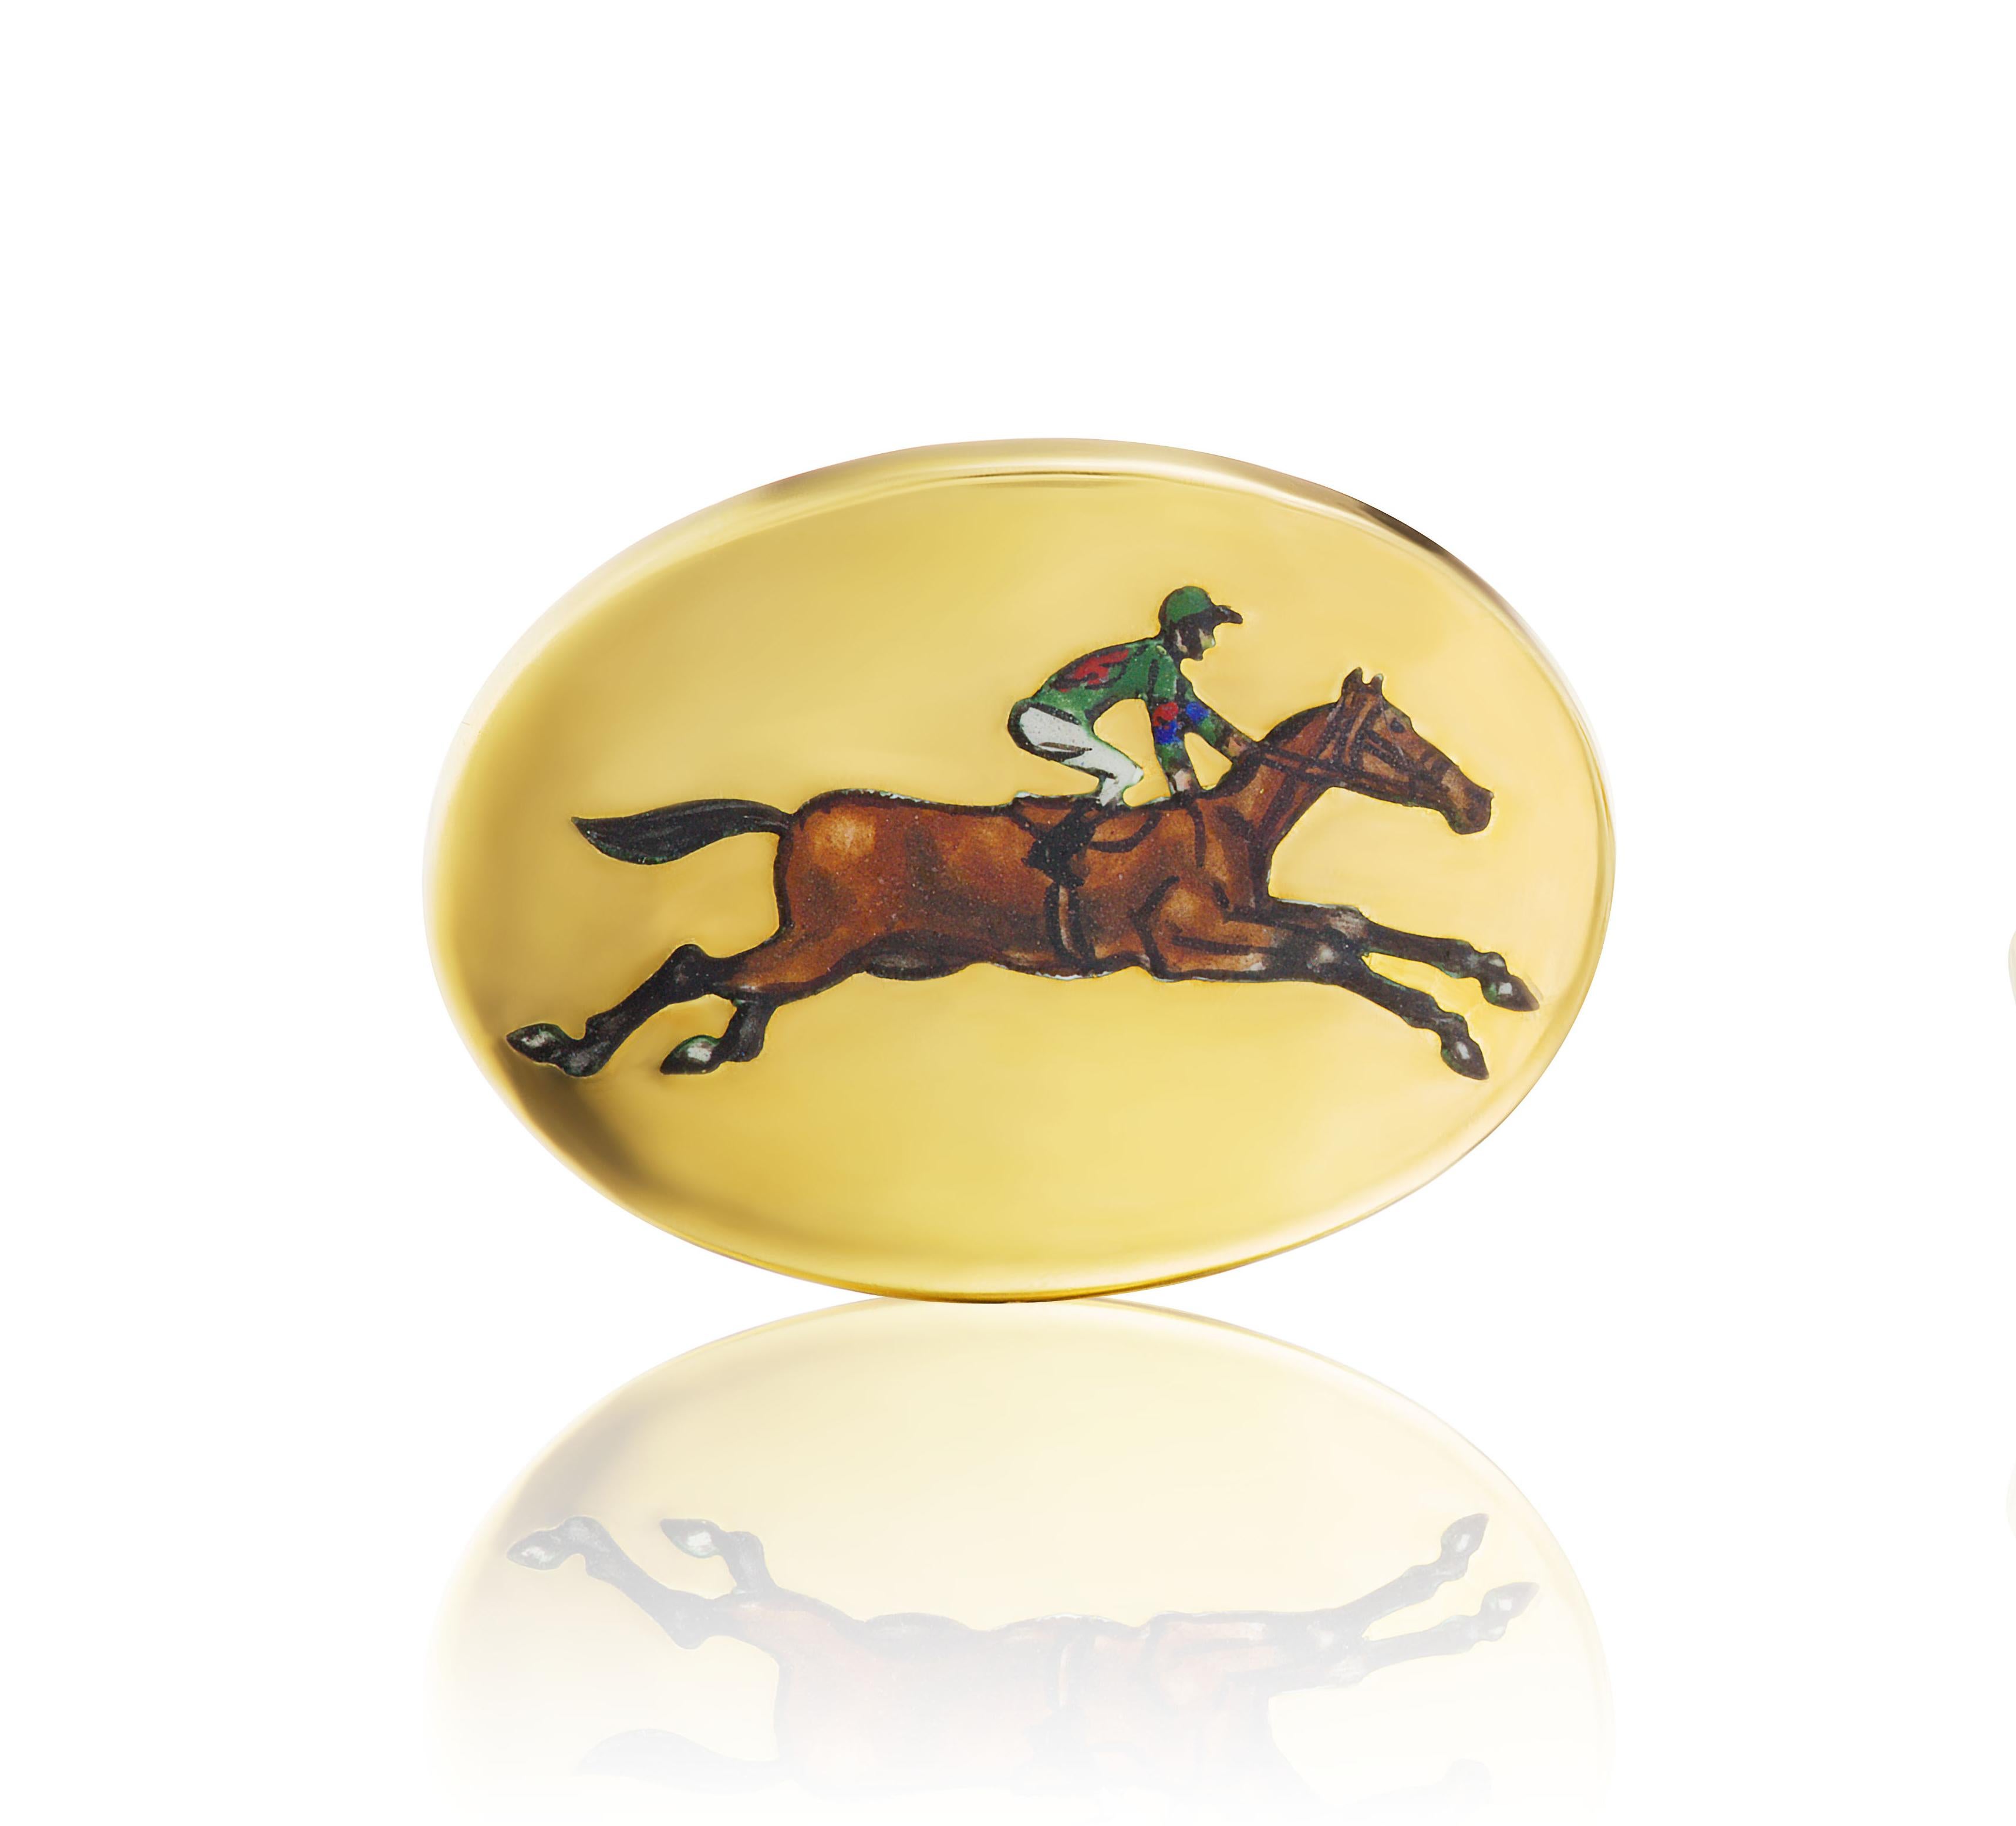 Vintage 18K gold cufflinks feature an enamel horse and rider mid-jump in fantastic detail.

Stamped D&F